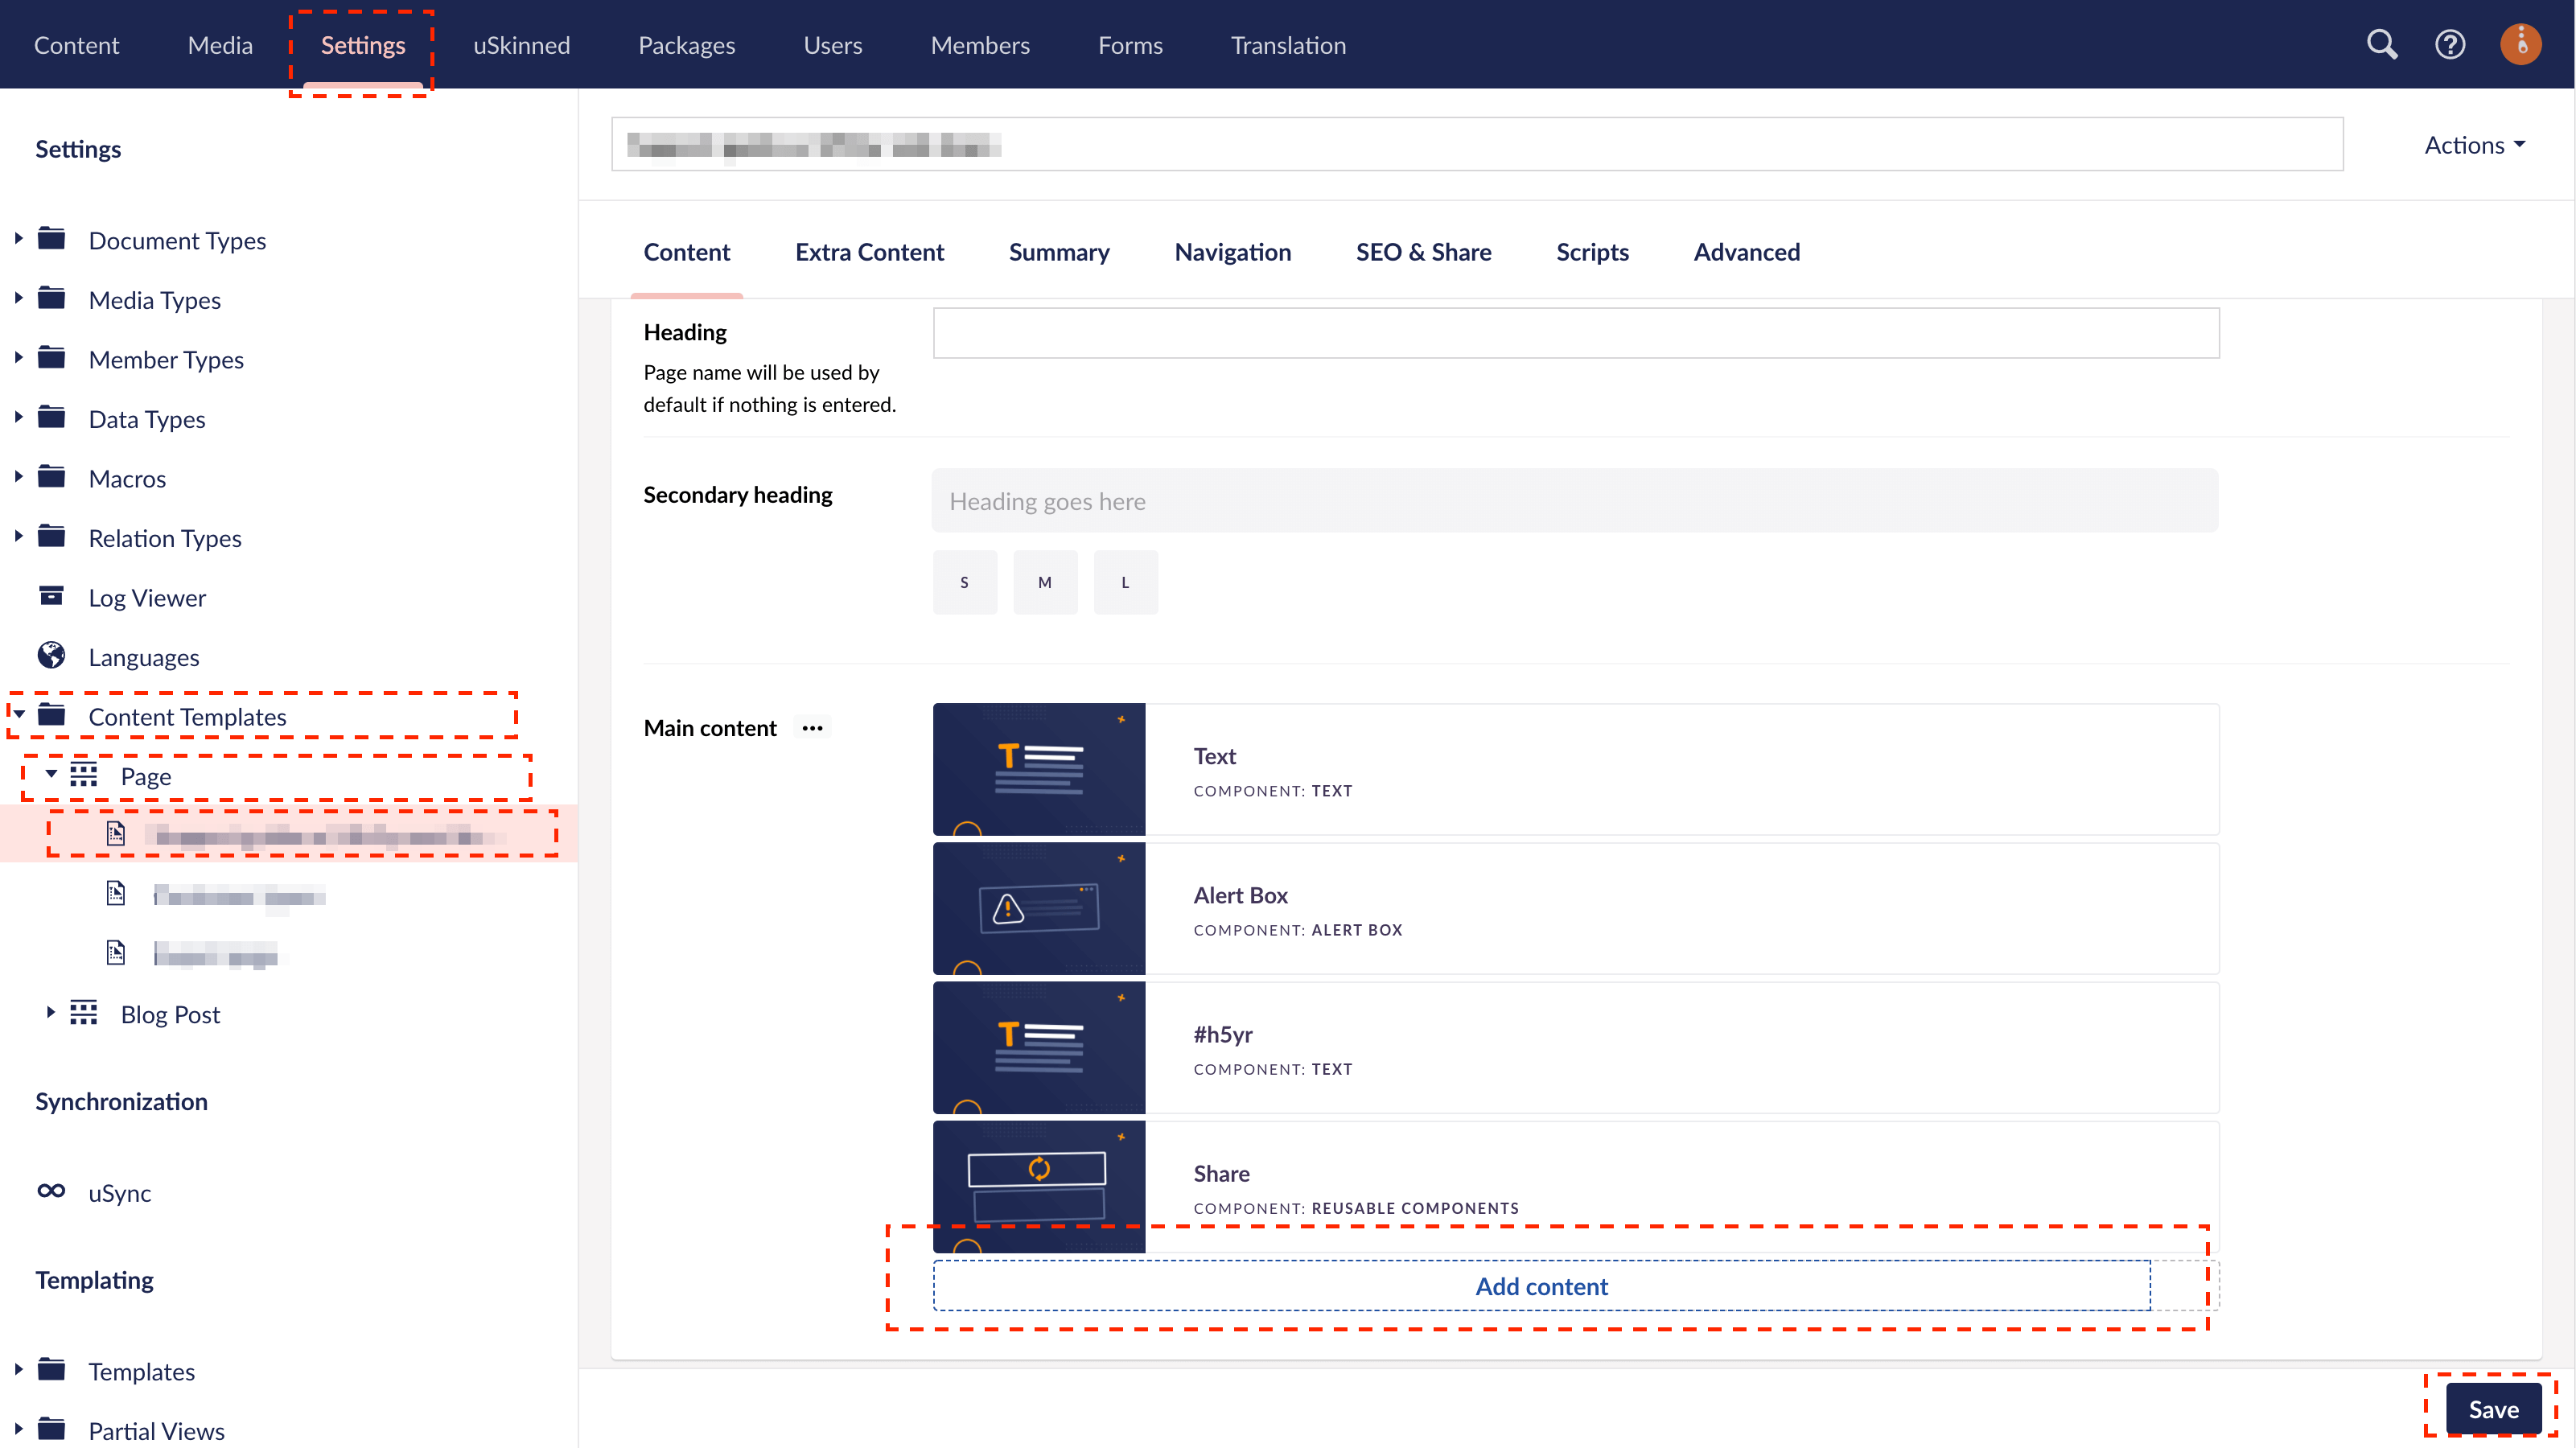 Edit Content Template with uSkinned for Umbraco.